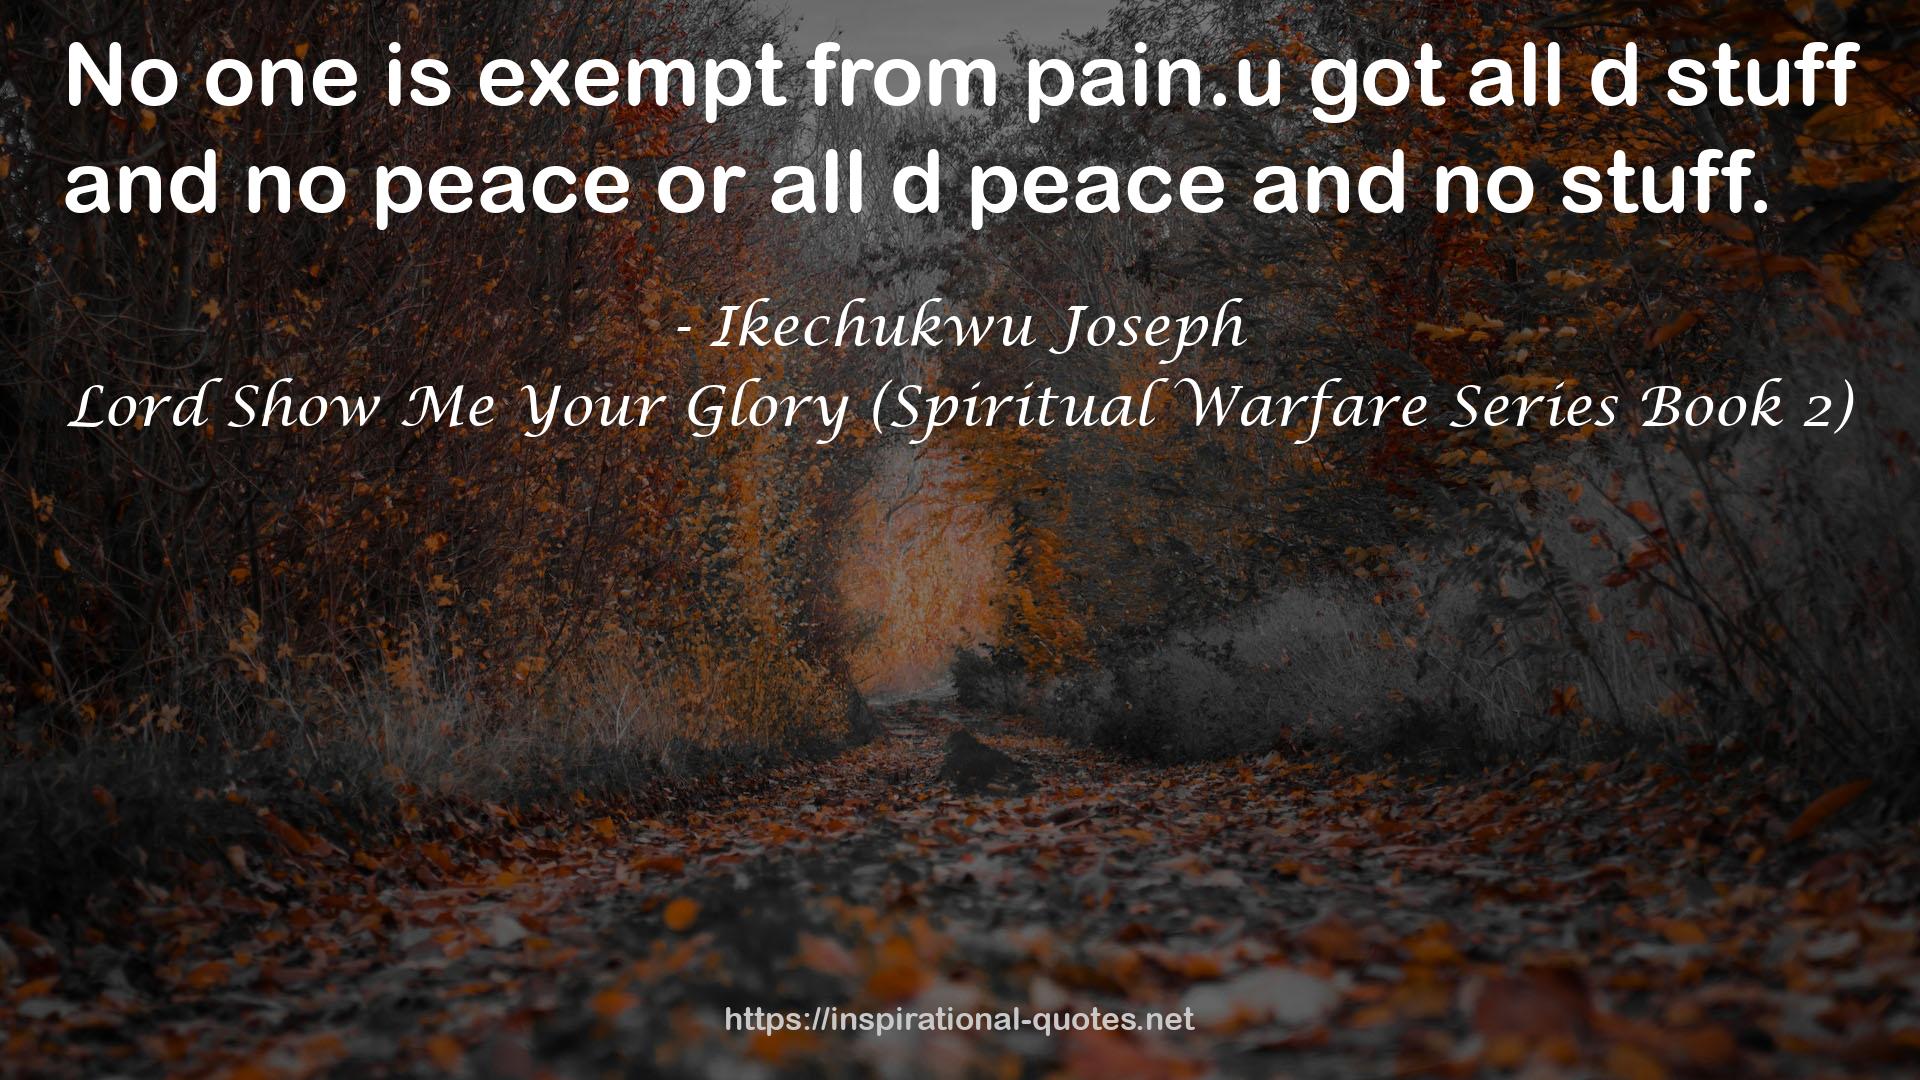 Lord Show Me Your Glory (Spiritual Warfare Series Book 2) QUOTES